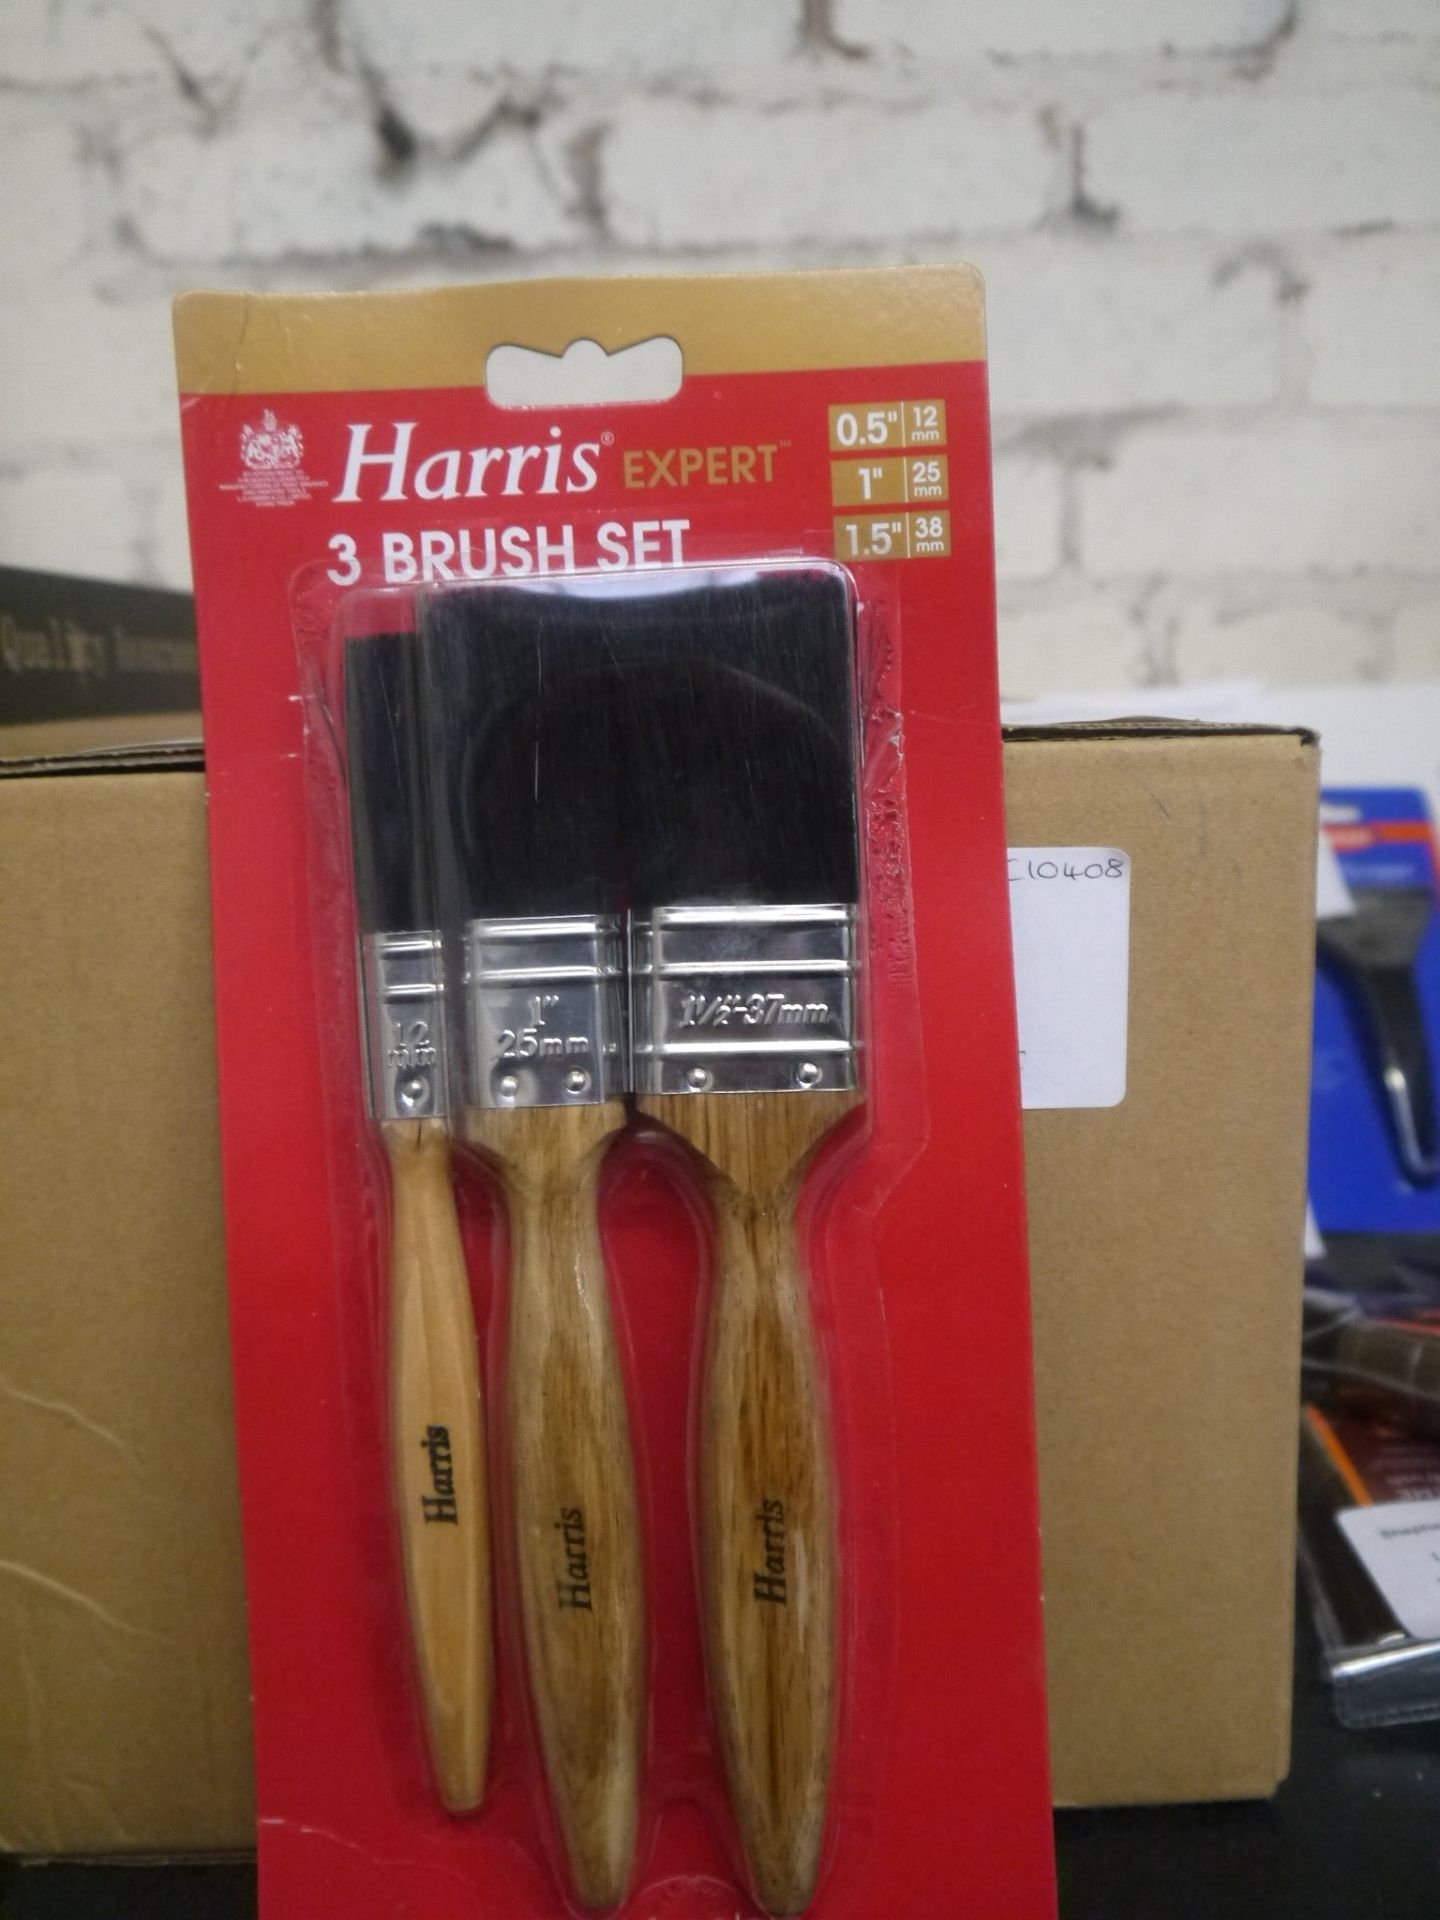 Set of 3 Harris Expert wooden handle paint brushes, new in packaging